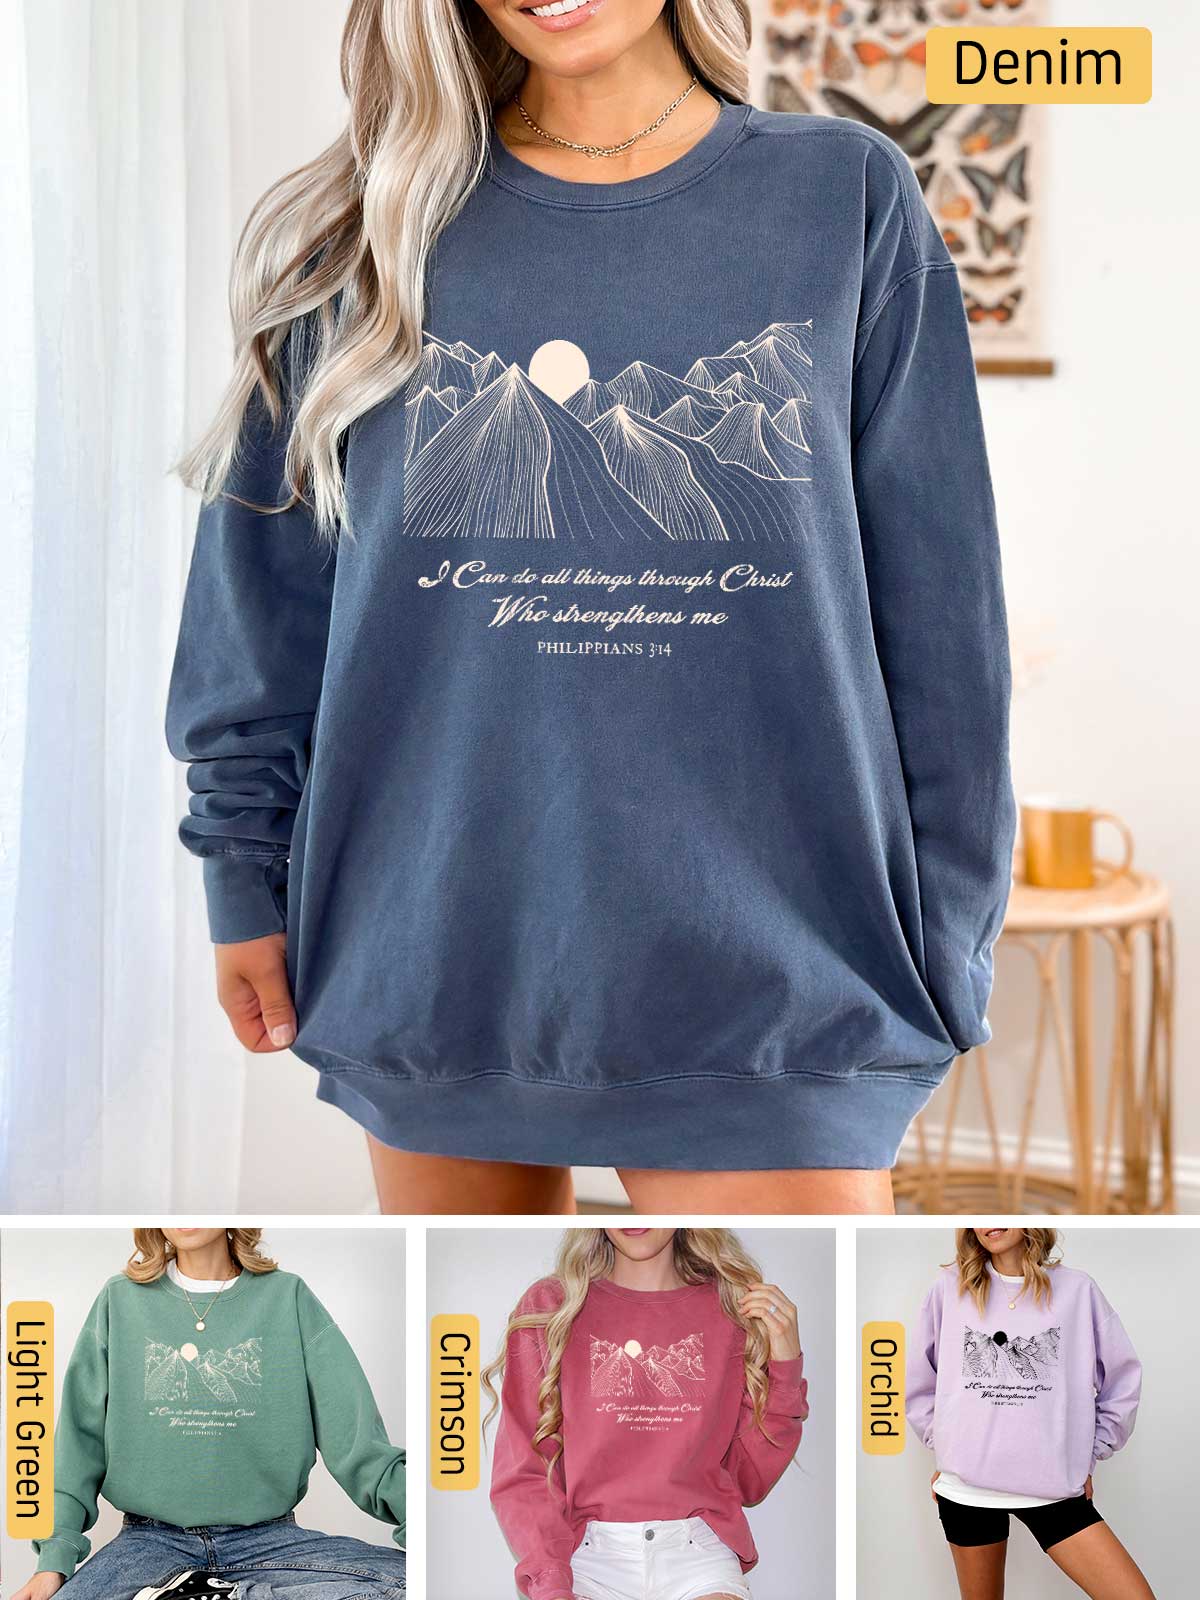 a woman wearing a sweatshirt with mountains on it